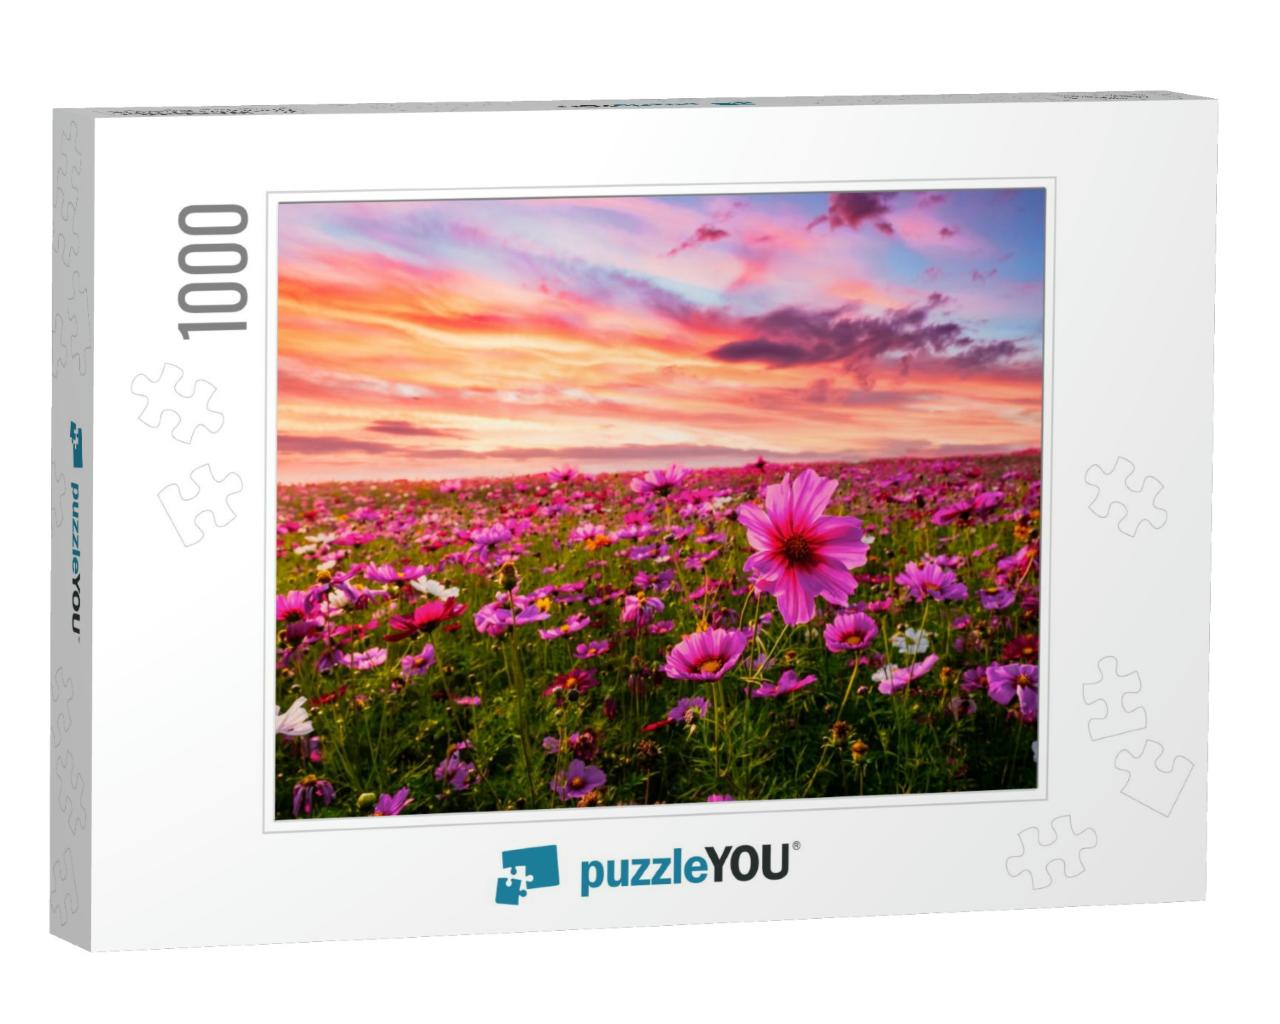 Beautiful & Amazing of Cosmos Flower Field Landscape in S... Jigsaw Puzzle with 1000 pieces